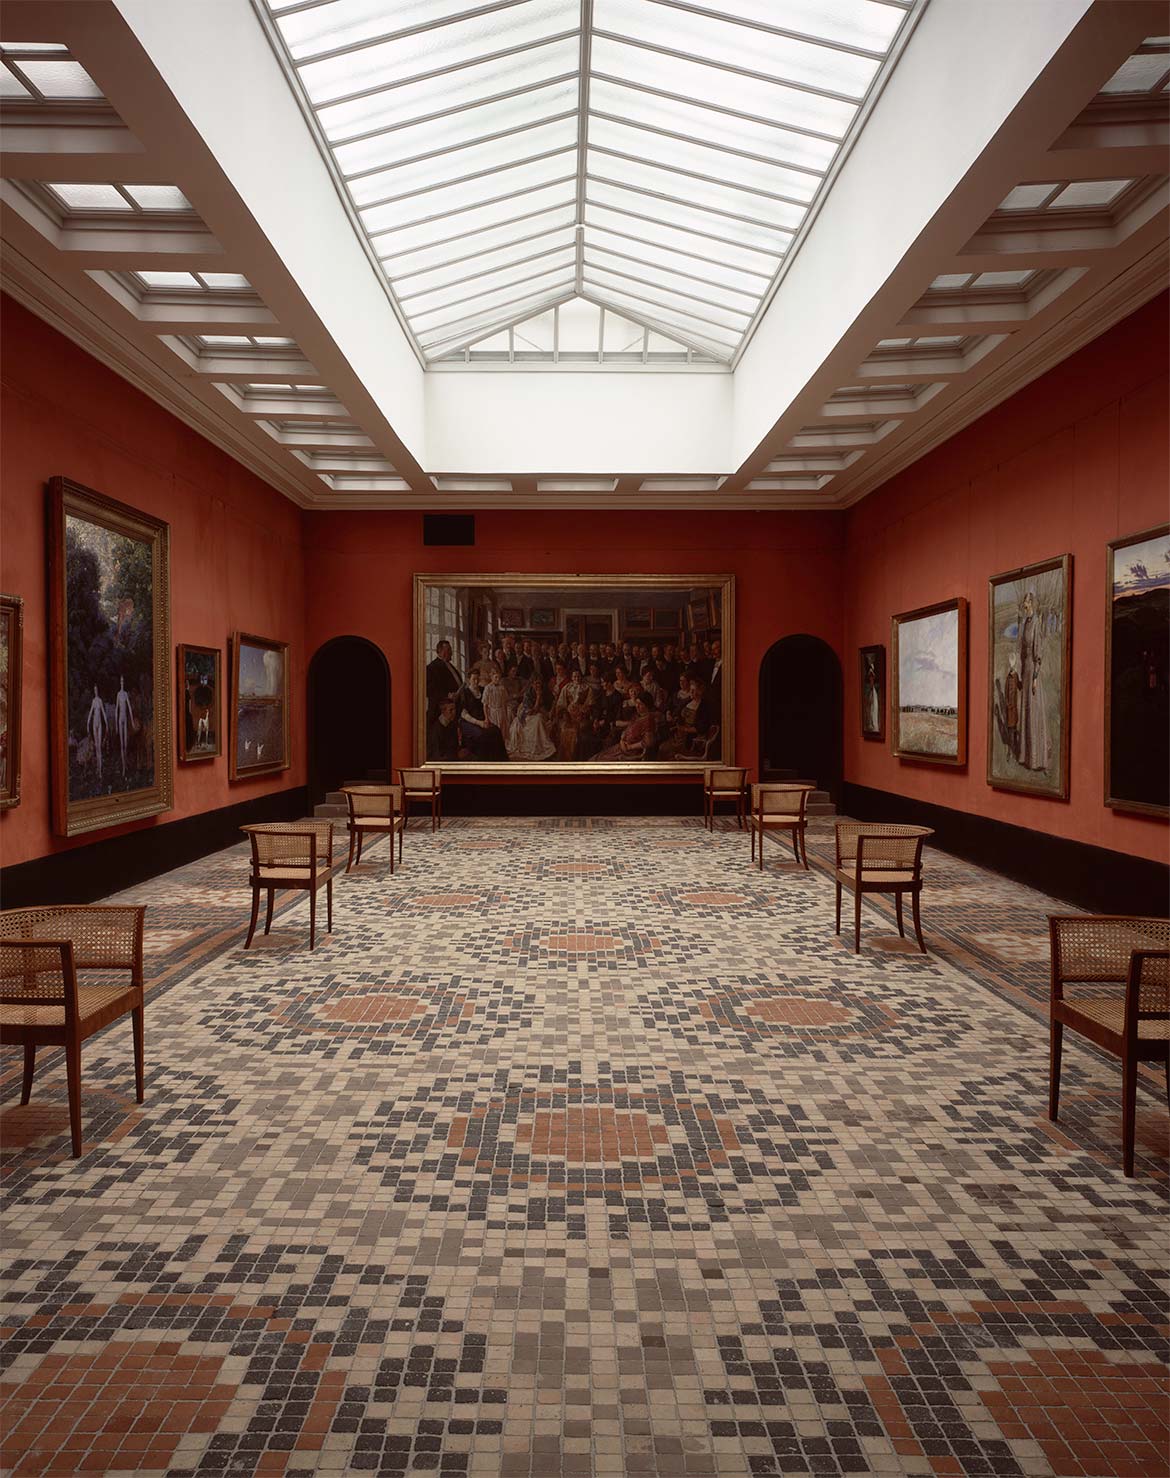 Main painting gallery with Peter Hansen’s painting of the inauguration of Faaborg Museum.